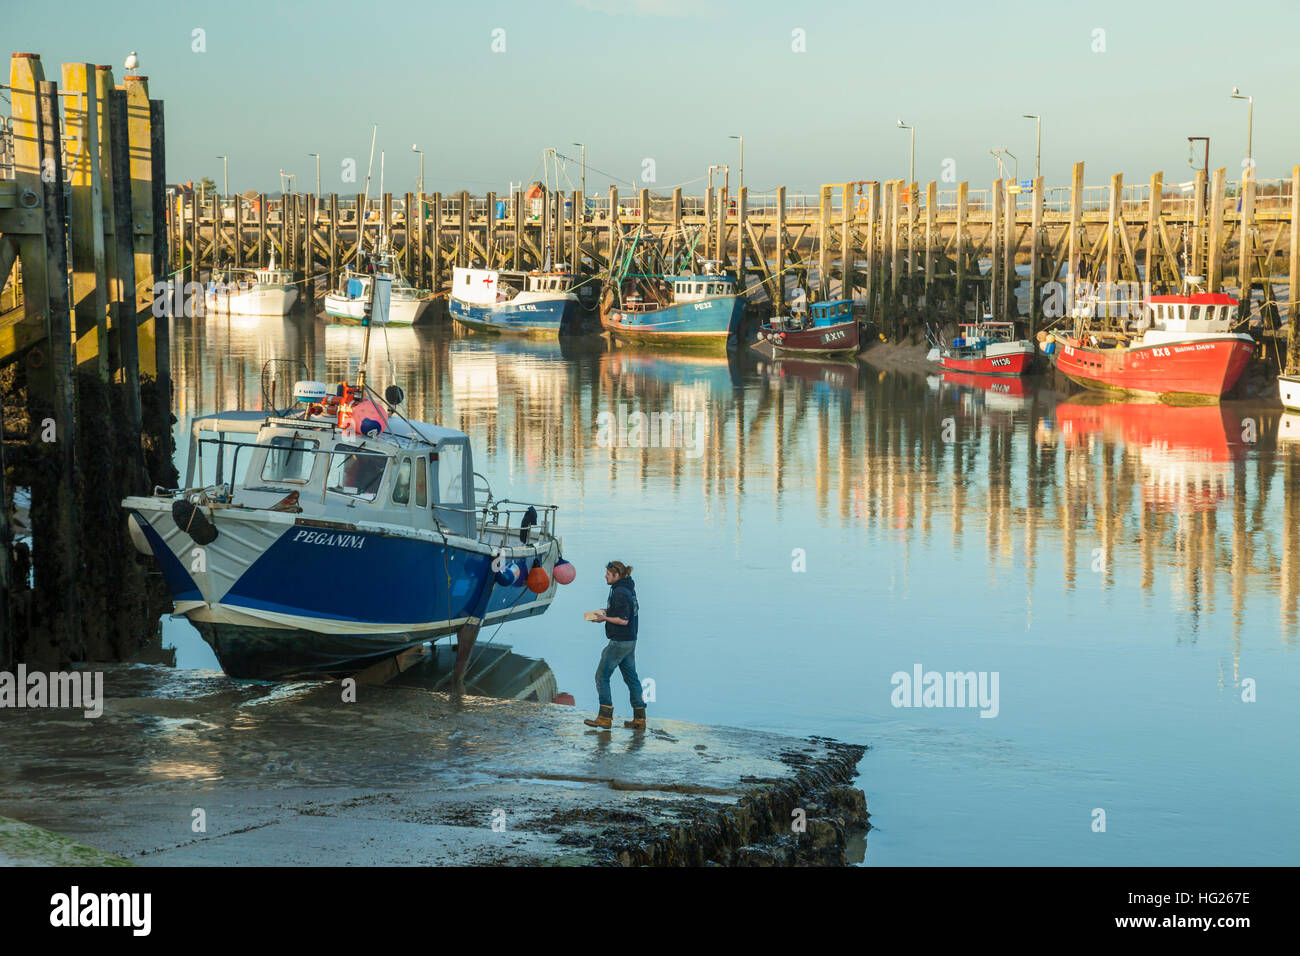 Winter afternoon at Rye Harbour, East Sussex, England. Stock Photo